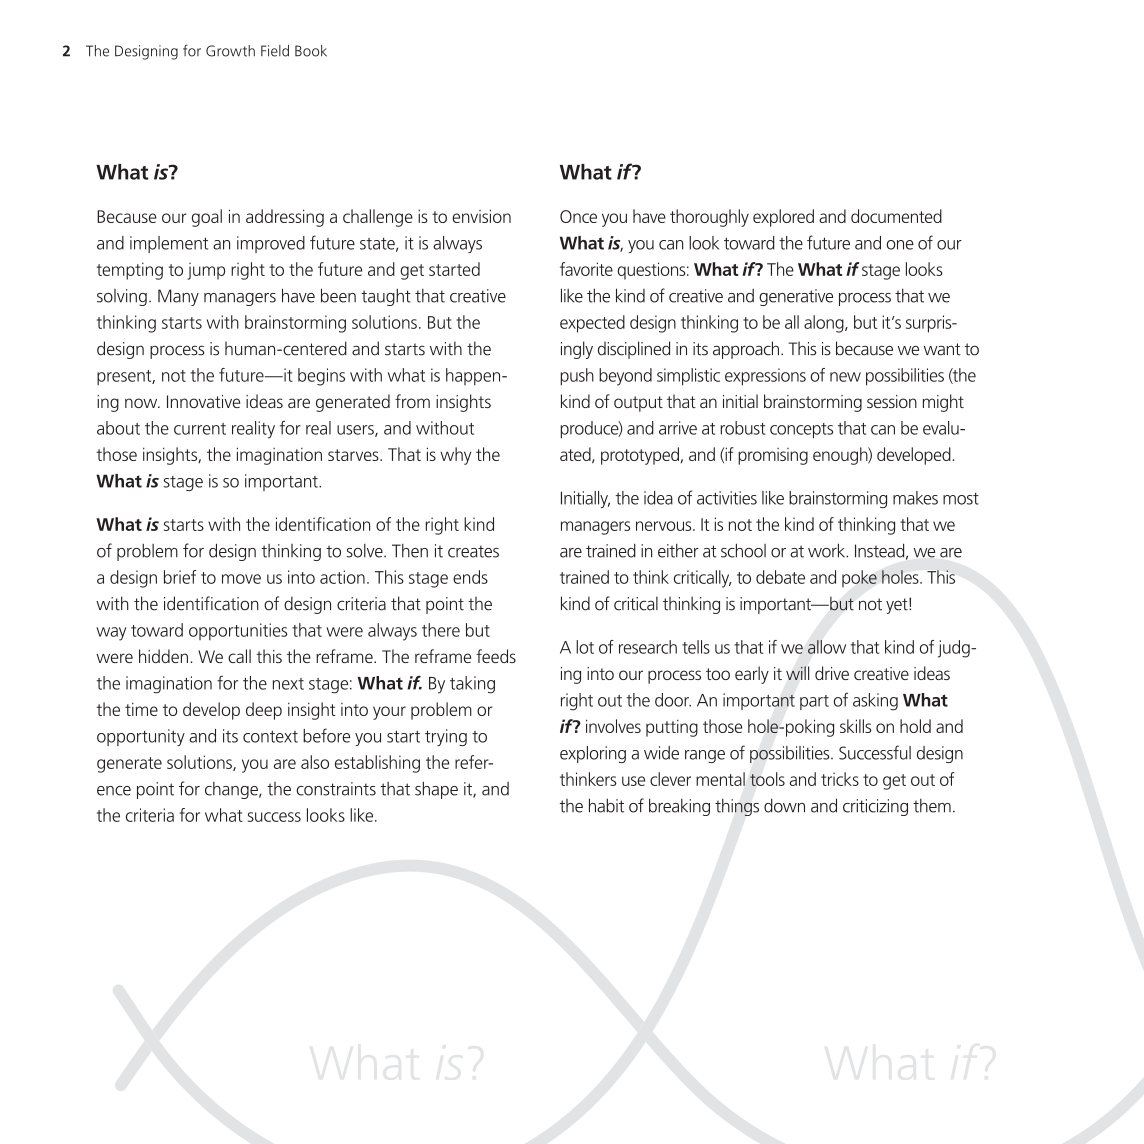 The Designing for Growth Field Book page 2